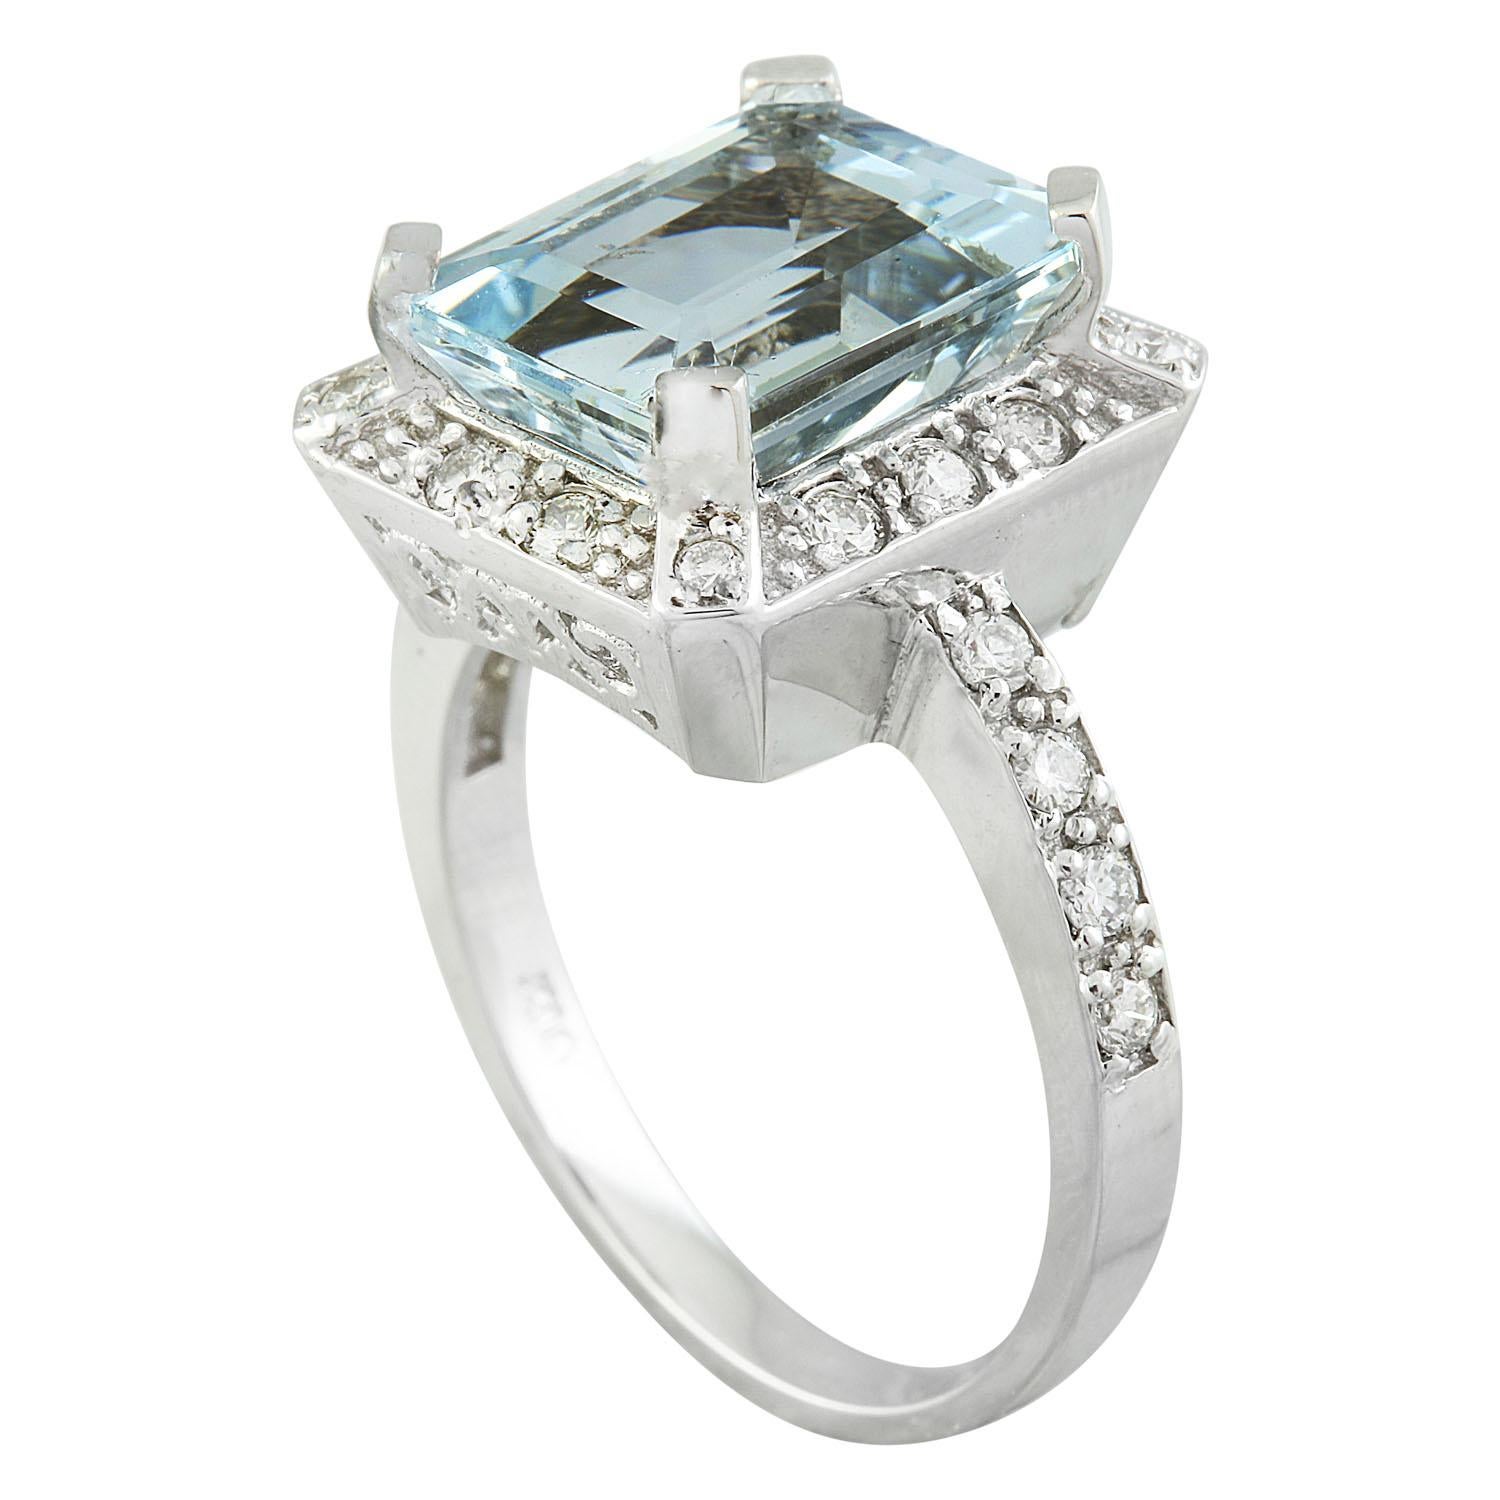 5.85 Carat Natural Aquamarine 14 Karat Solid White Gold Diamond Ring
Stamped: 14K
Total Ring Weight: 7.4 Grams
Aquamarine Weight 5.35 Carat (12.00x10.00 Millimeters)
Diamond Weight: 0.50 carat (F-G Color, VS2-SI1 Clarity )
Face Measures: 15.70x13.70